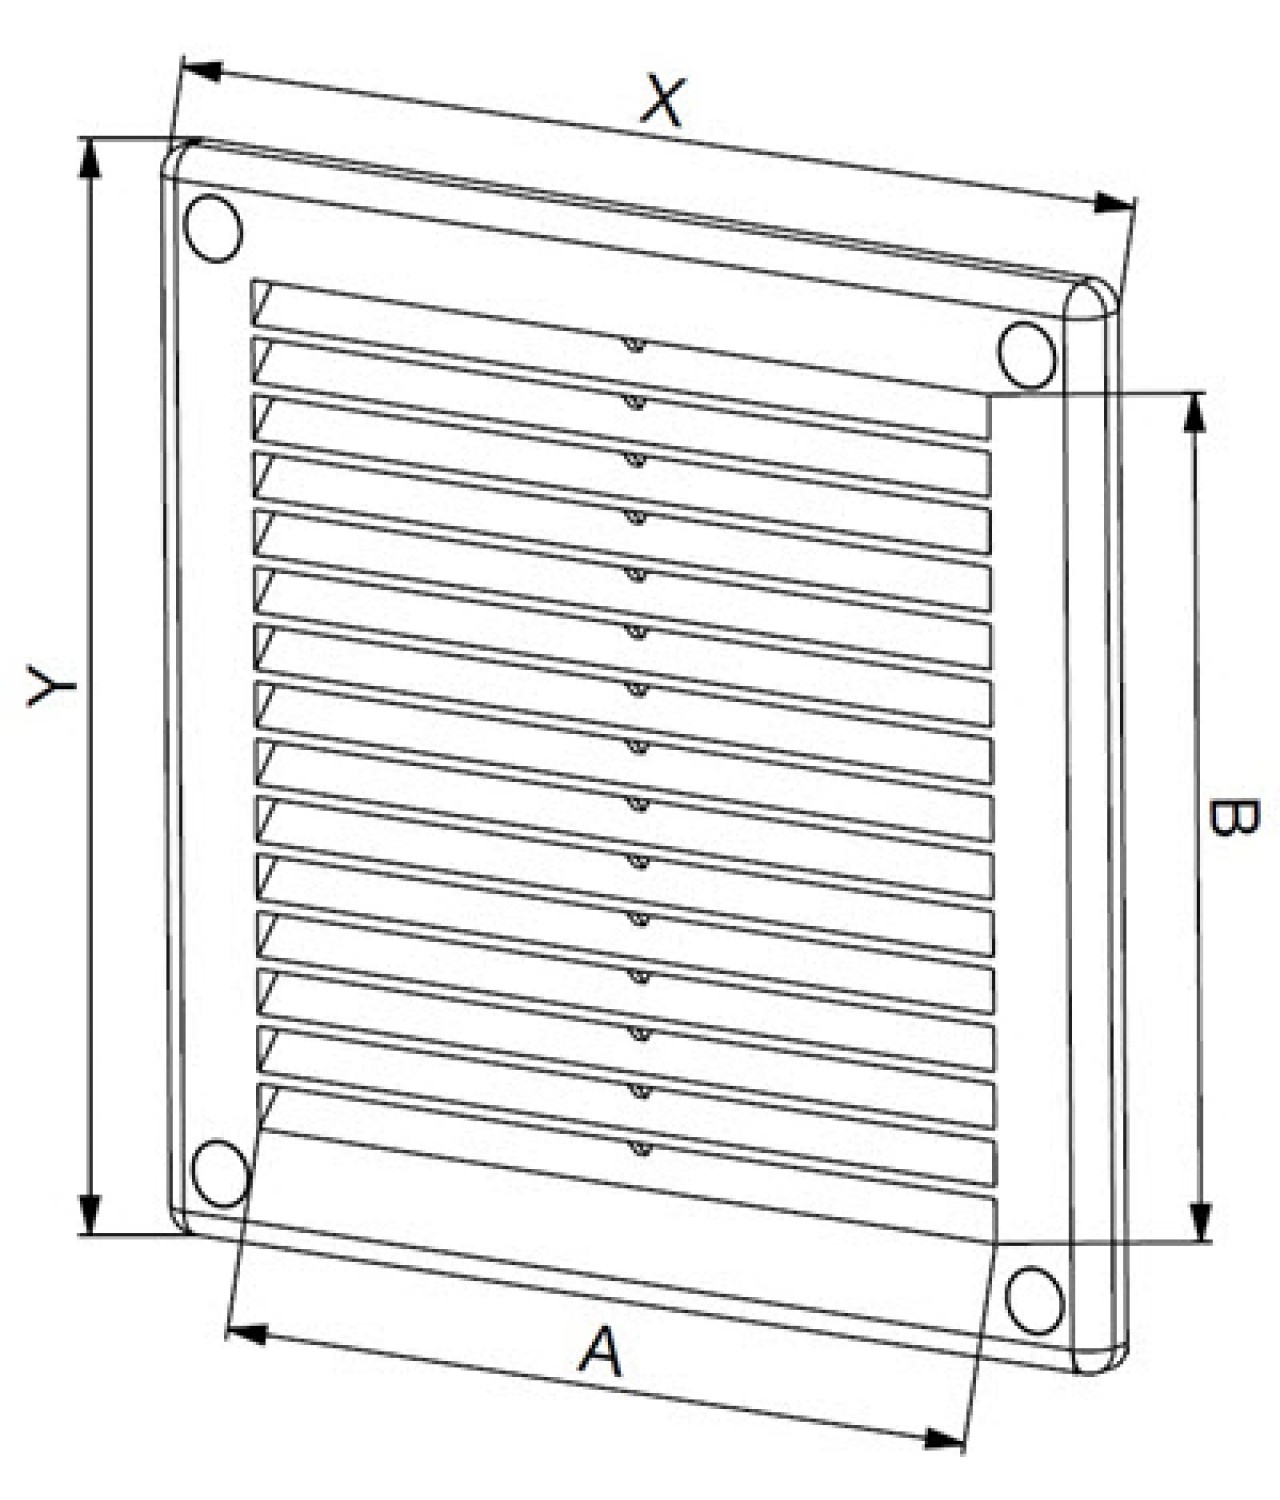 Vent cover 150x310 mm, GRU12 - drawing